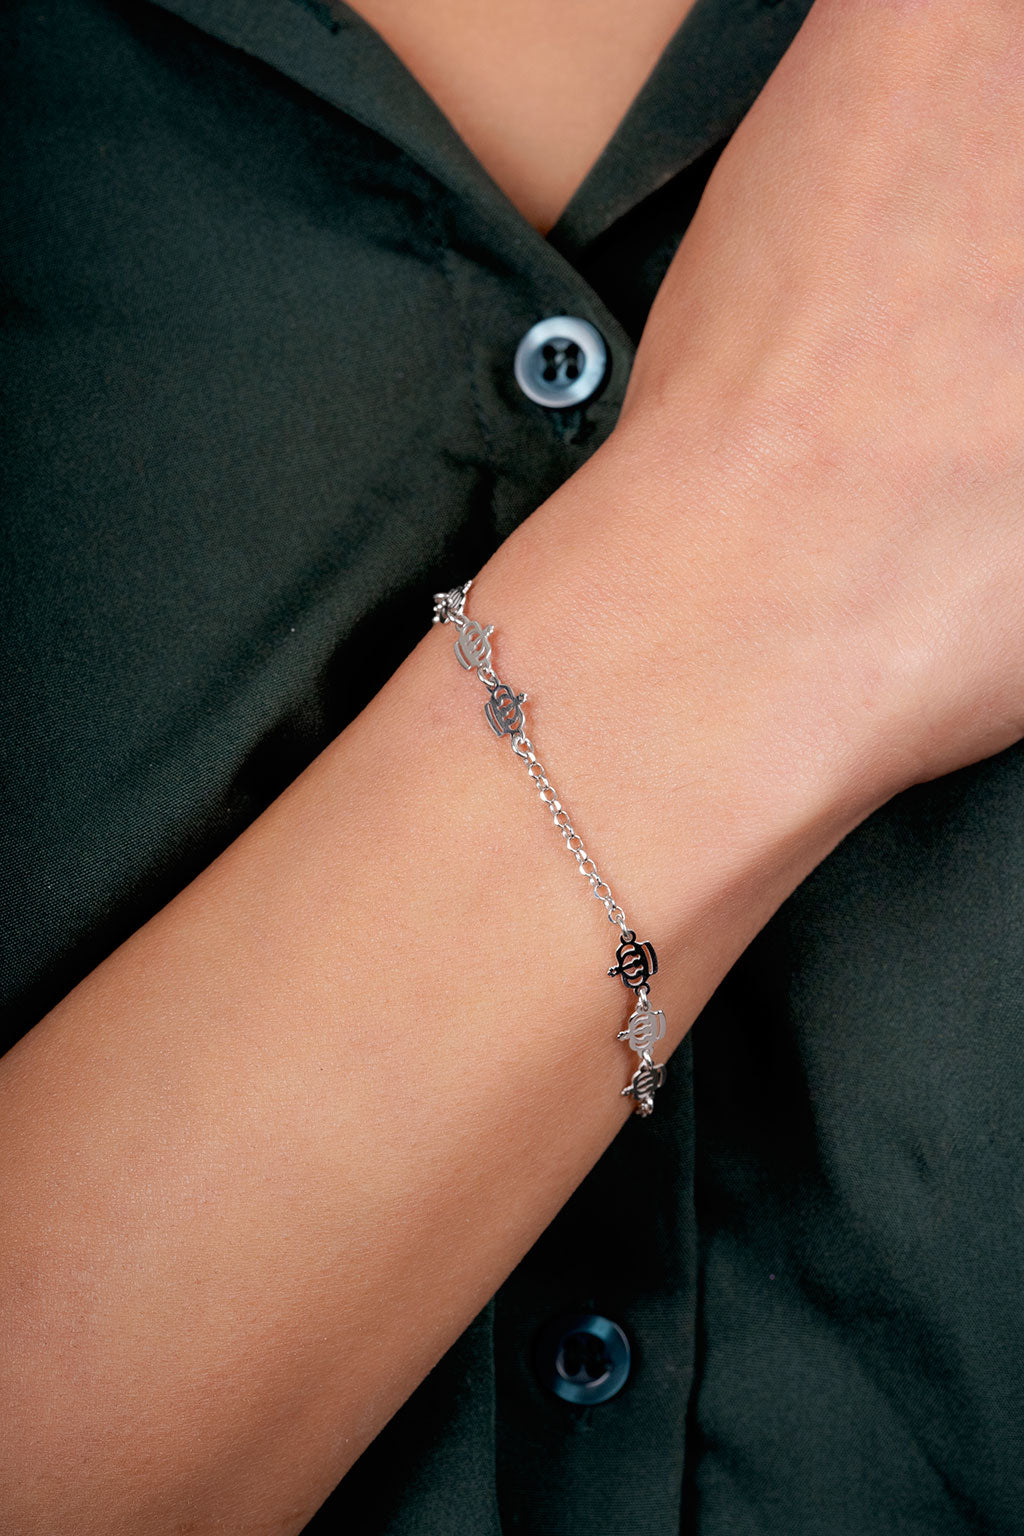 Sparkling 925 Silver Chained Bracelet